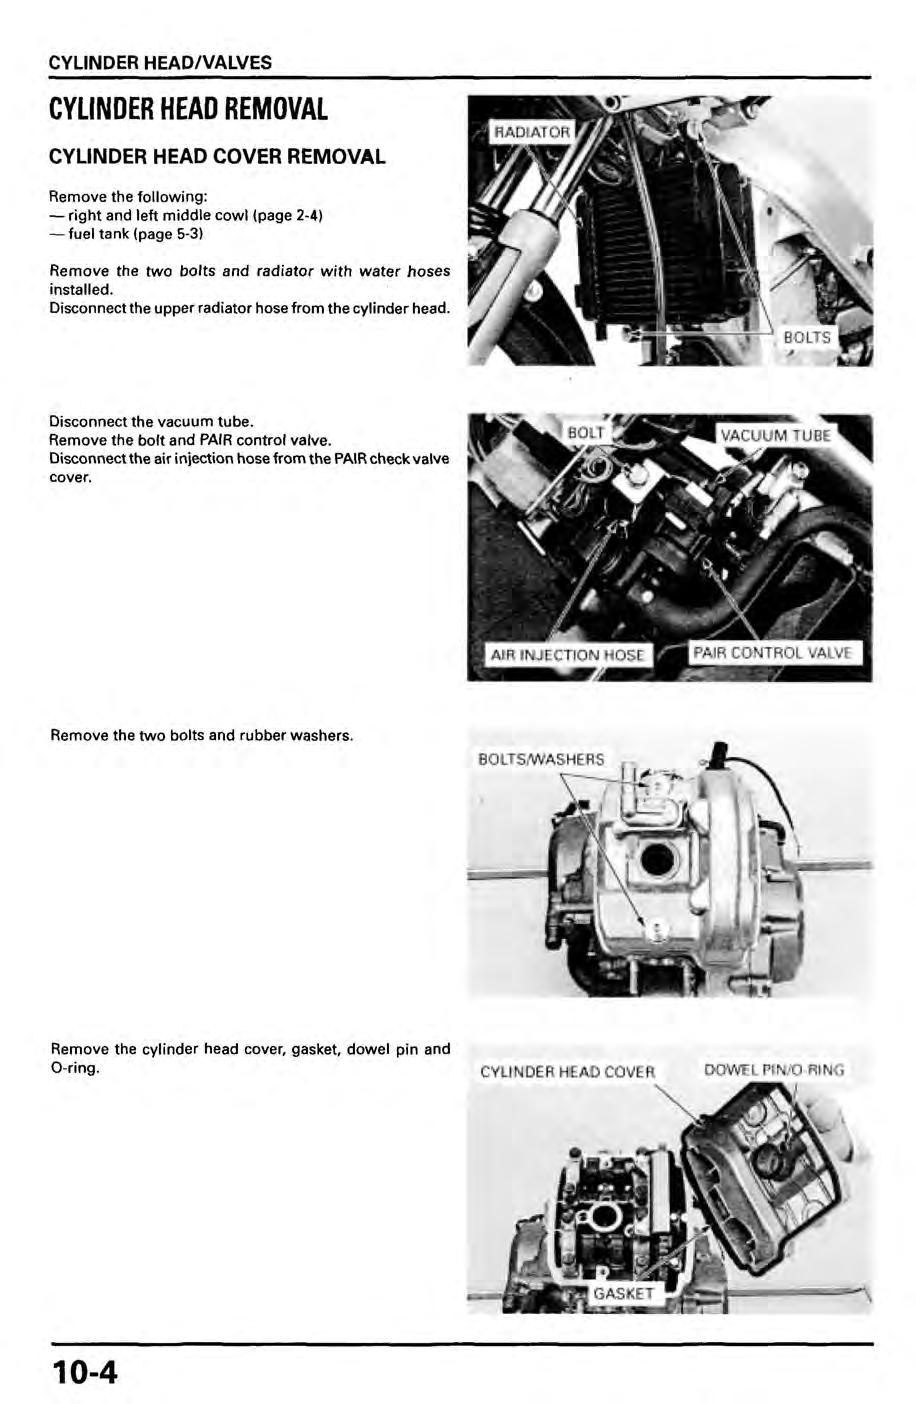 CYLINDER HEADNALVES HEAD/VALVES CYLINDER HEAD REMOVAL CYLINDER HEAD COVER REMOVAL Remove the following: -right- and left middle cowl (page 2-4) -fuel- fuel tank (page 5-3) Remove the two bolts and